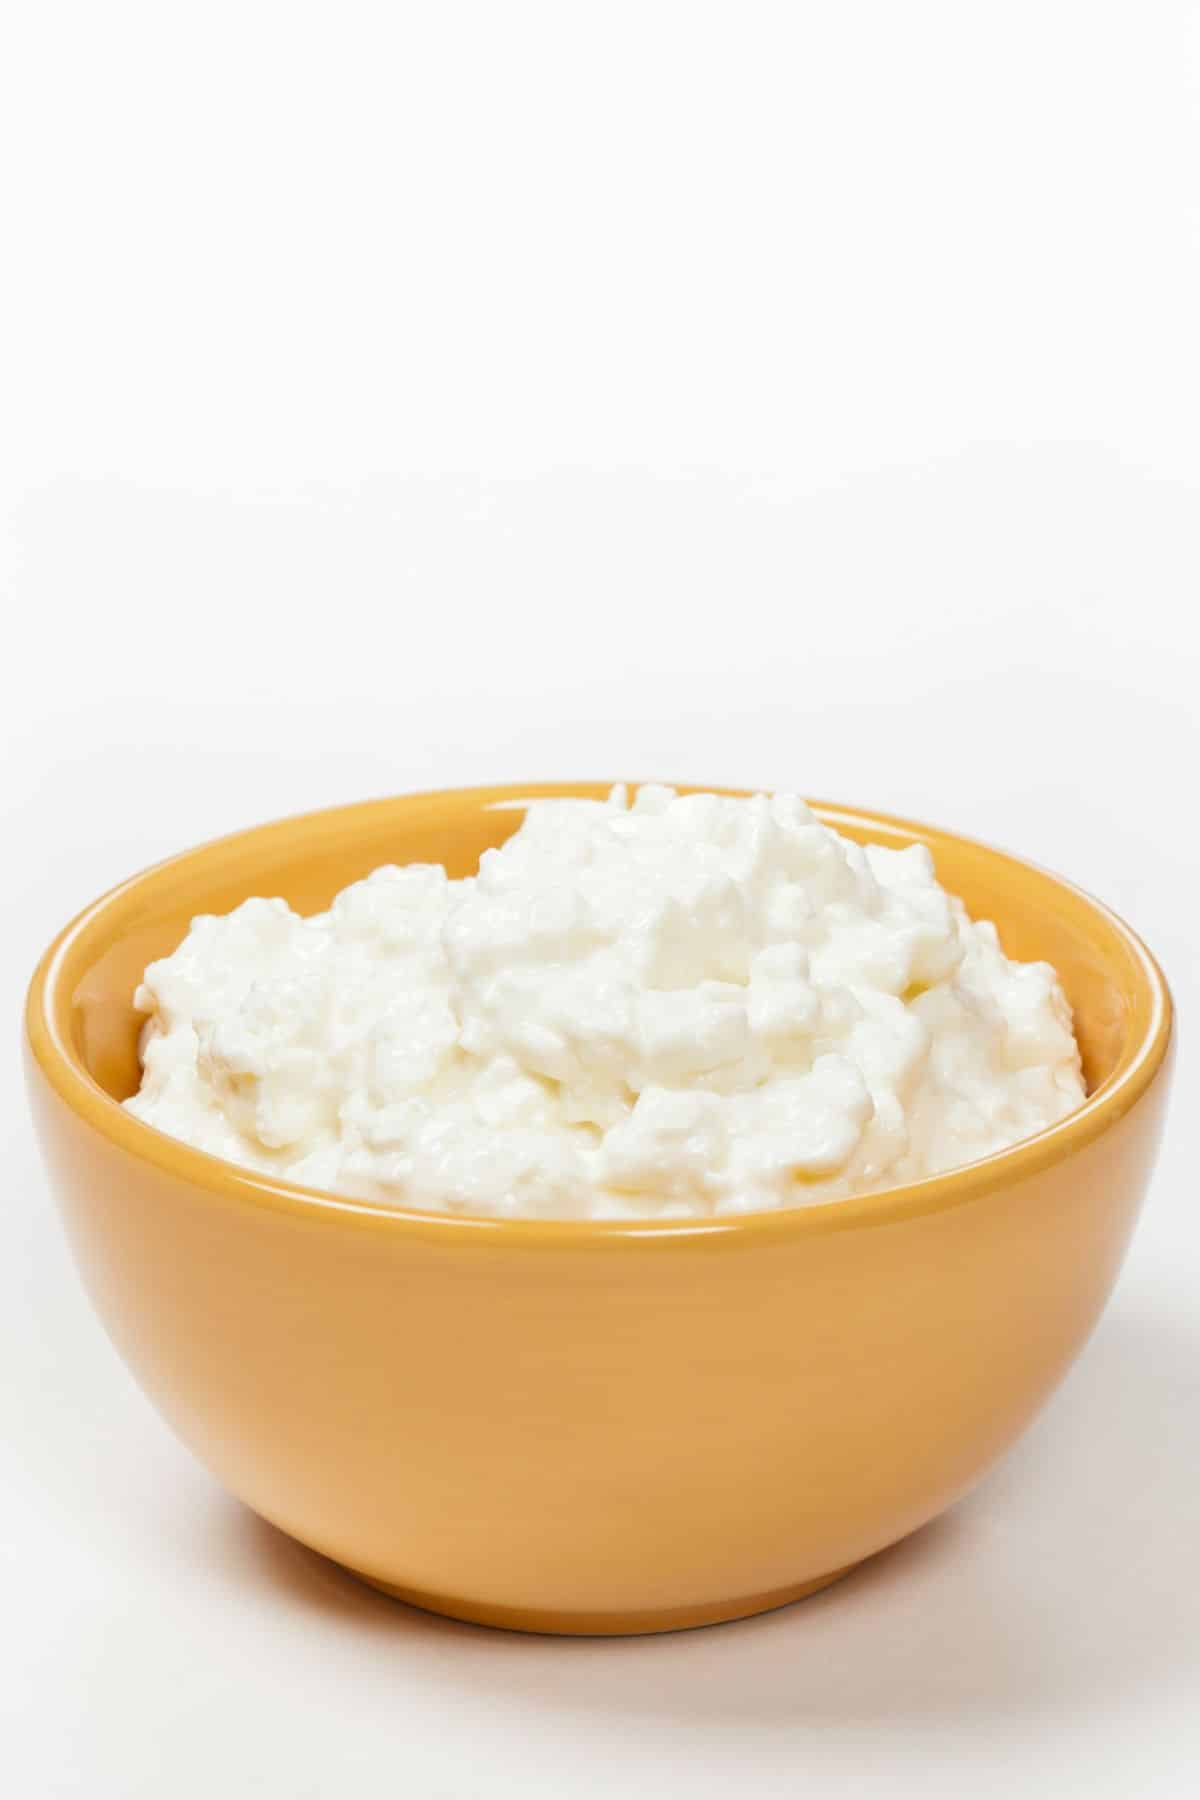 Small yellow bowl of cottage cheese on a white counter.